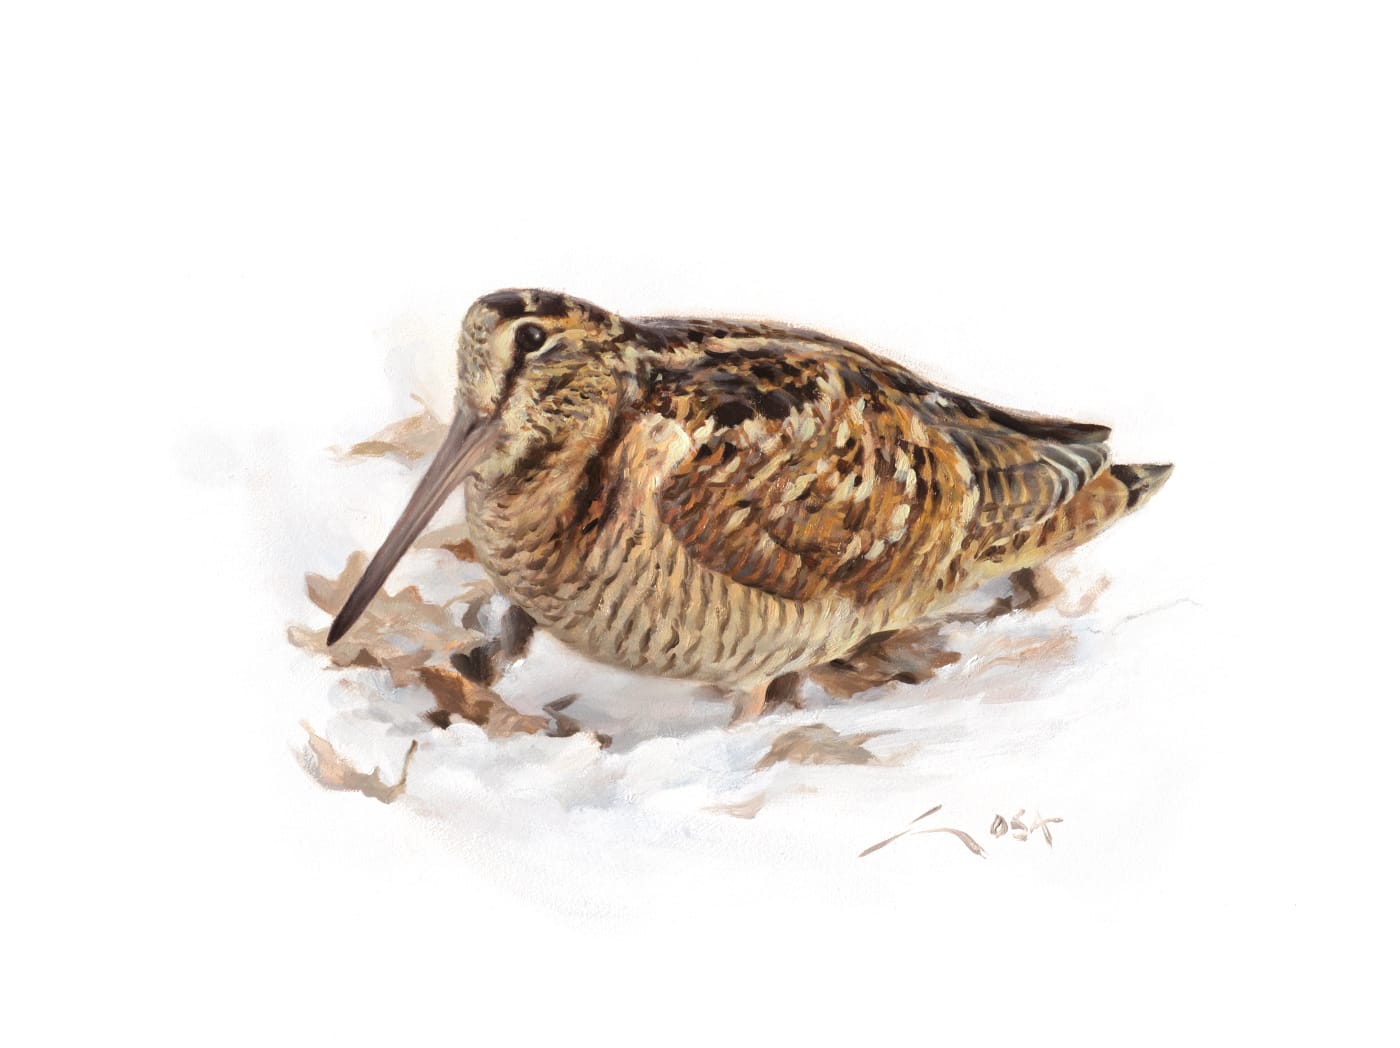 Woodcock in the snow